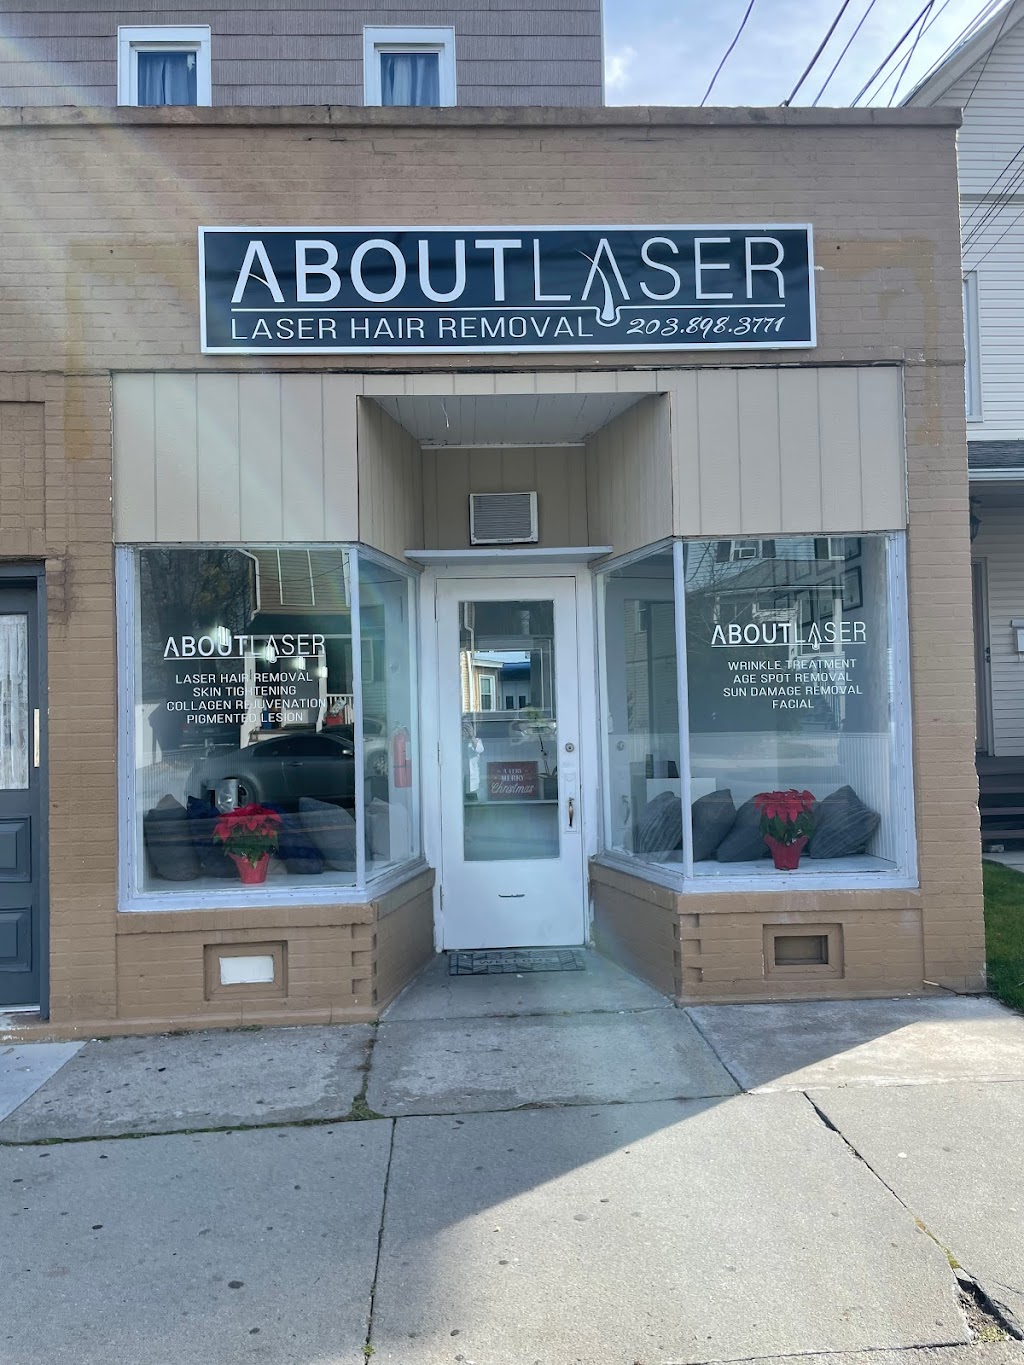 About laser | 353 Willett Ave, Port Chester, NY 10573 | Phone: (203) 898-3771